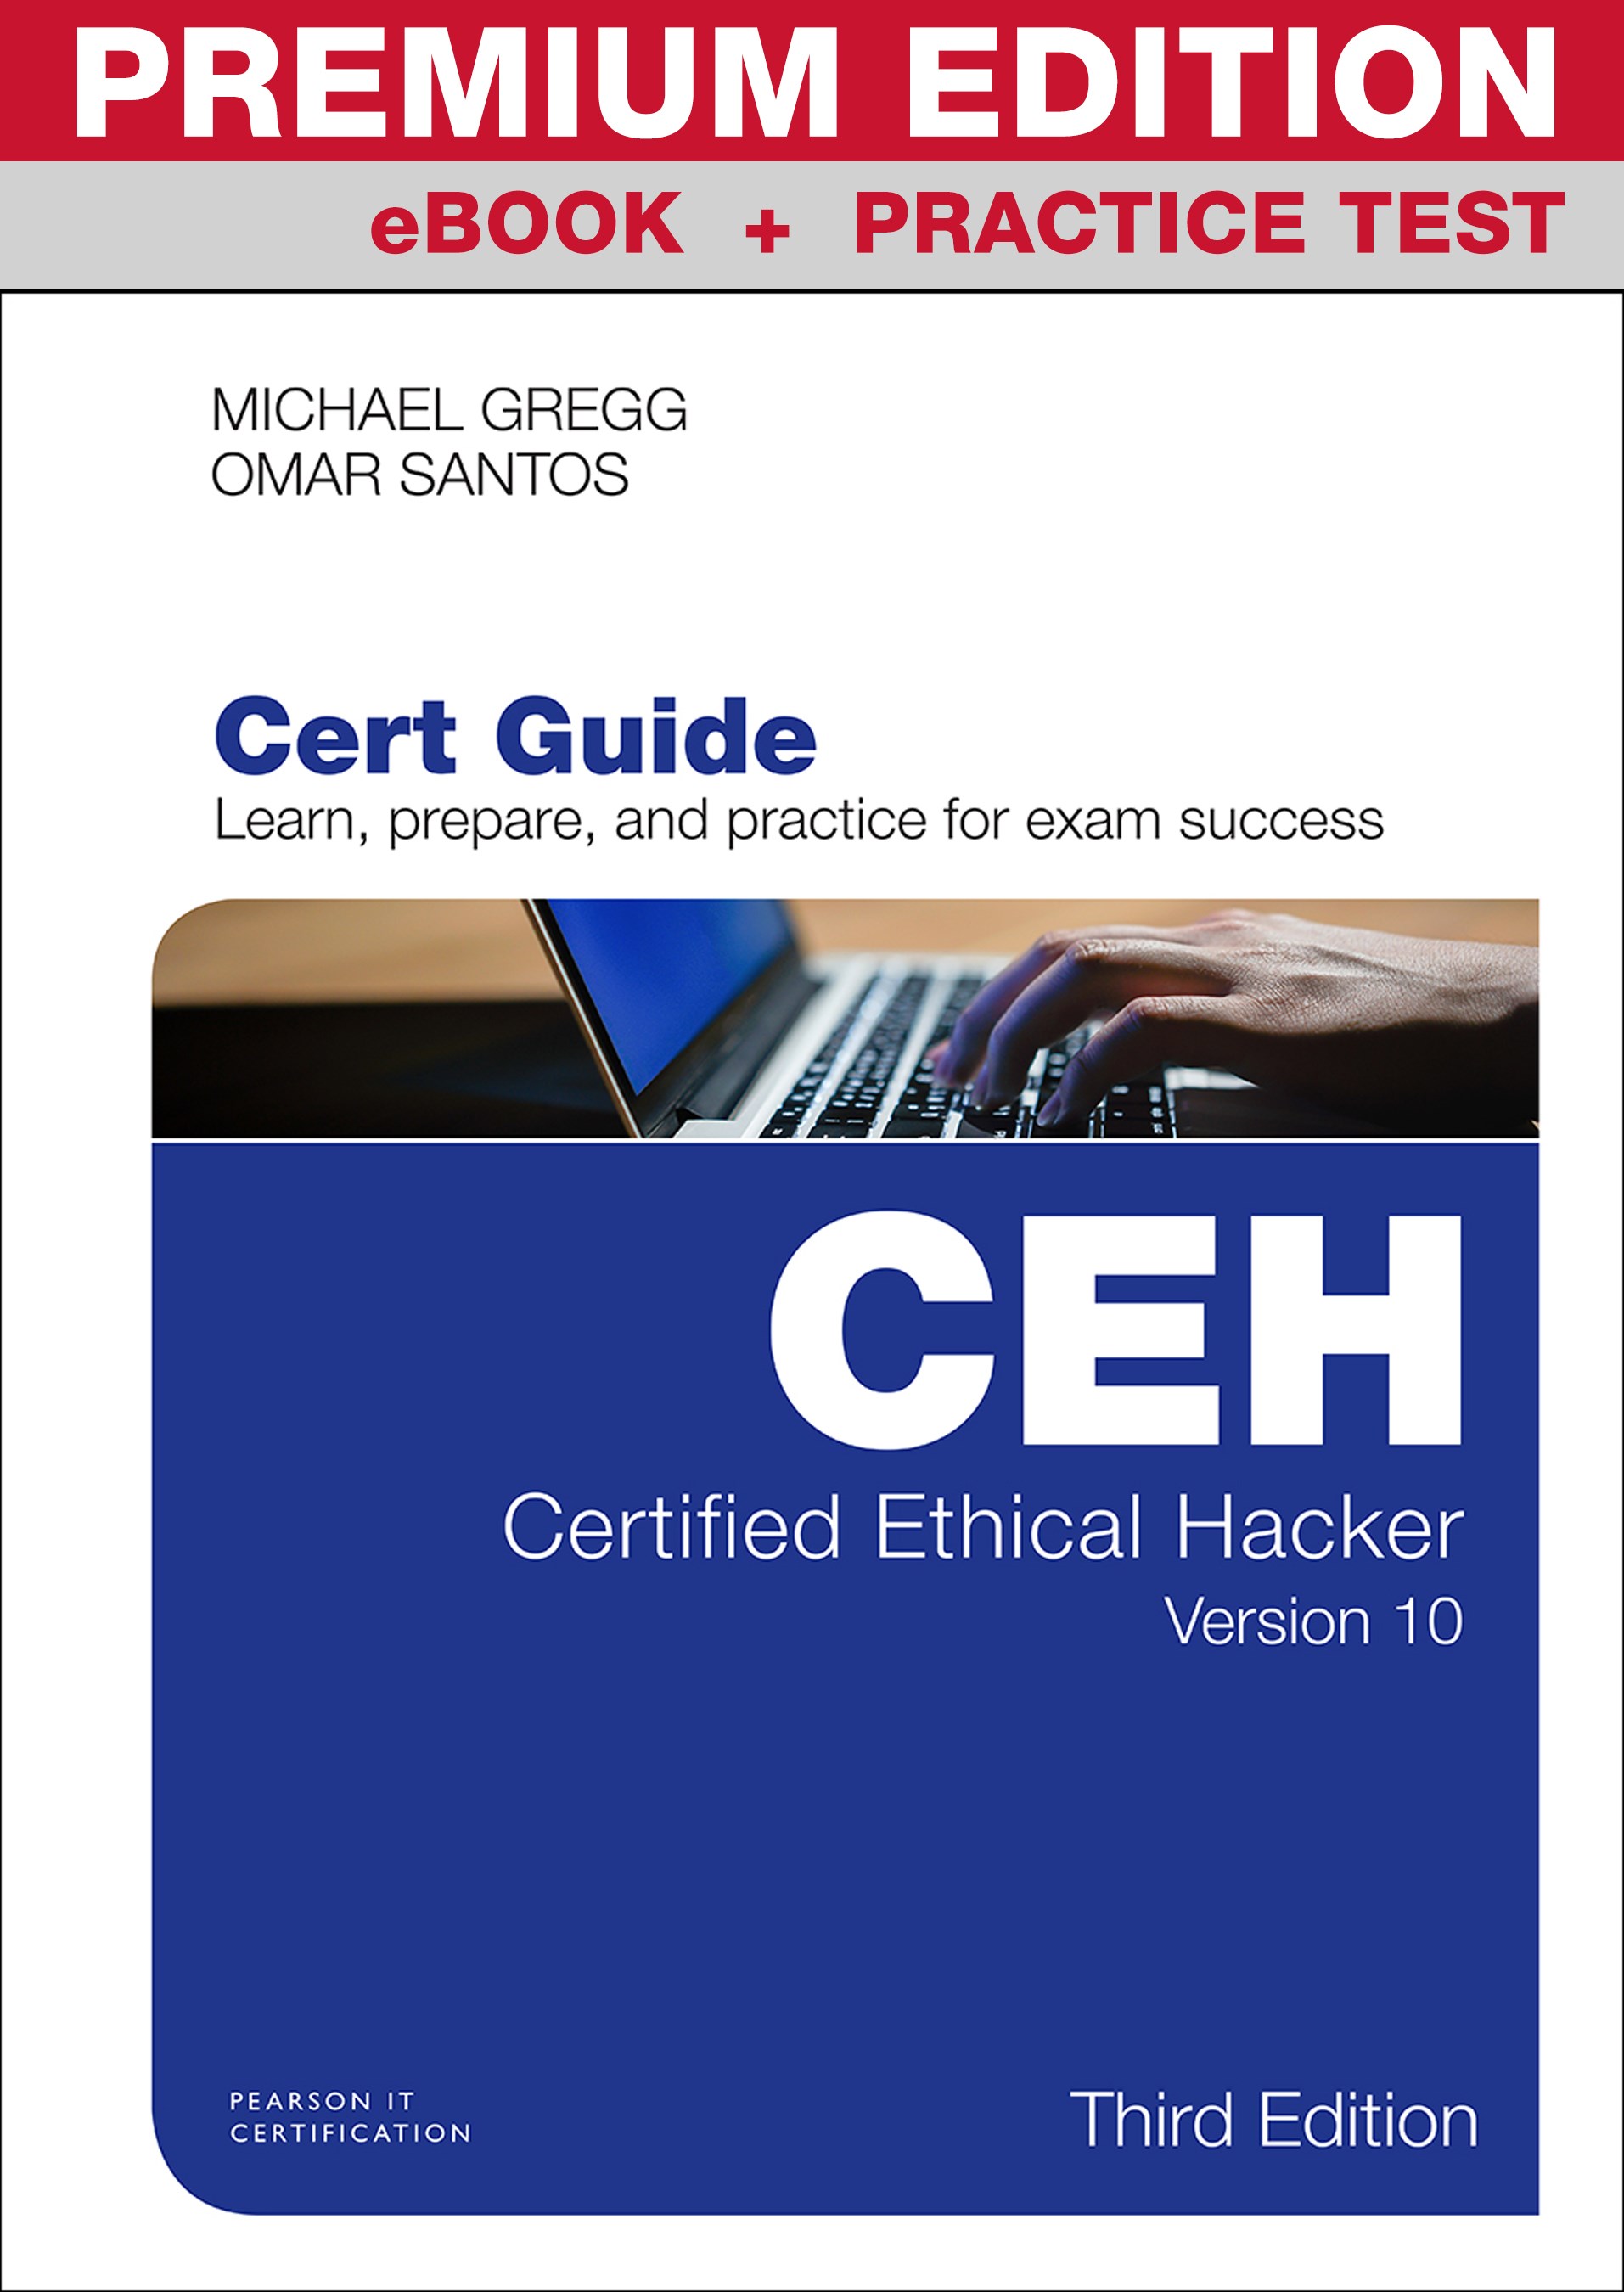 Certified Ethical Hacker (CEH) Version 10 Cert Guide Premium Edition and Practice Tests, 3rd Edition